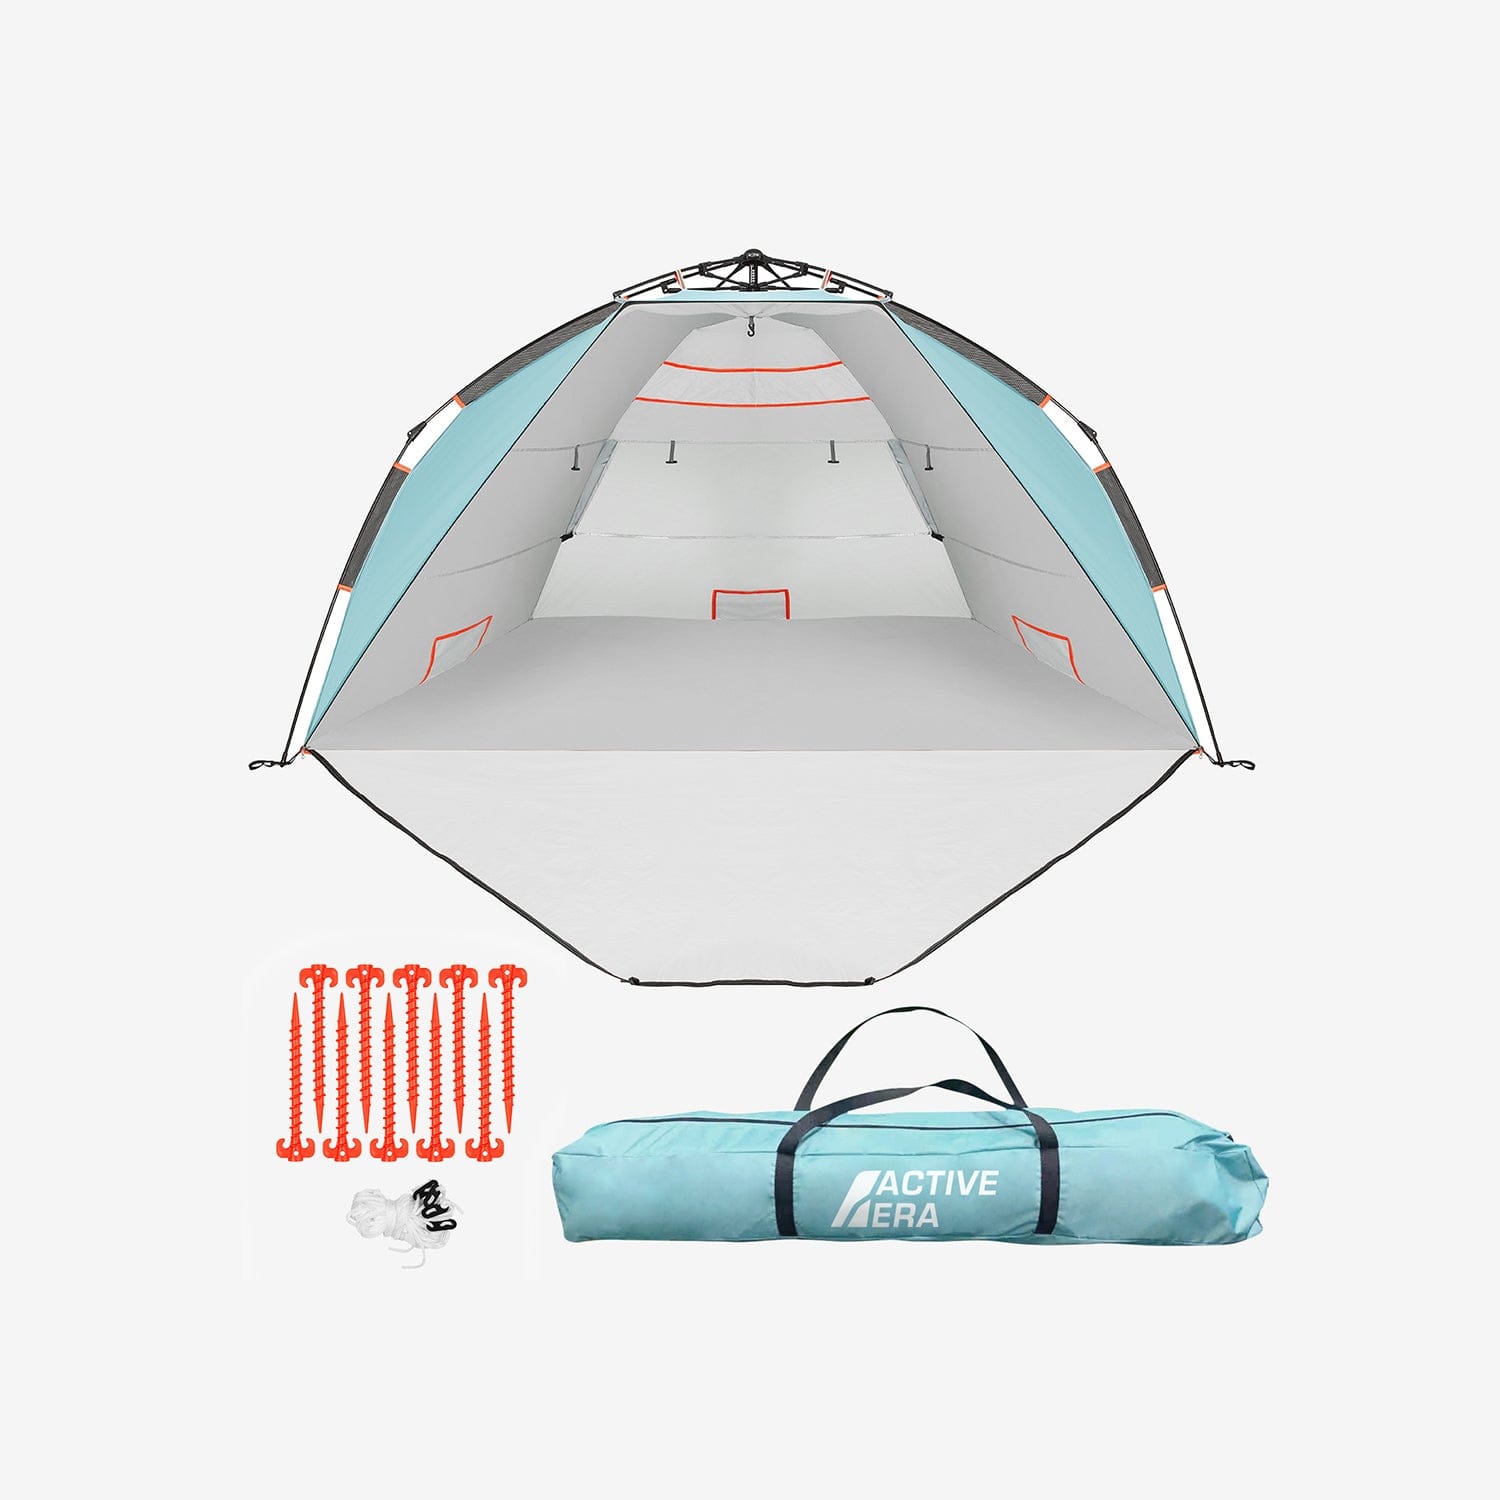 3-4 Person Luxury Beach Tent with UPF 50+ Rated Sun Protection